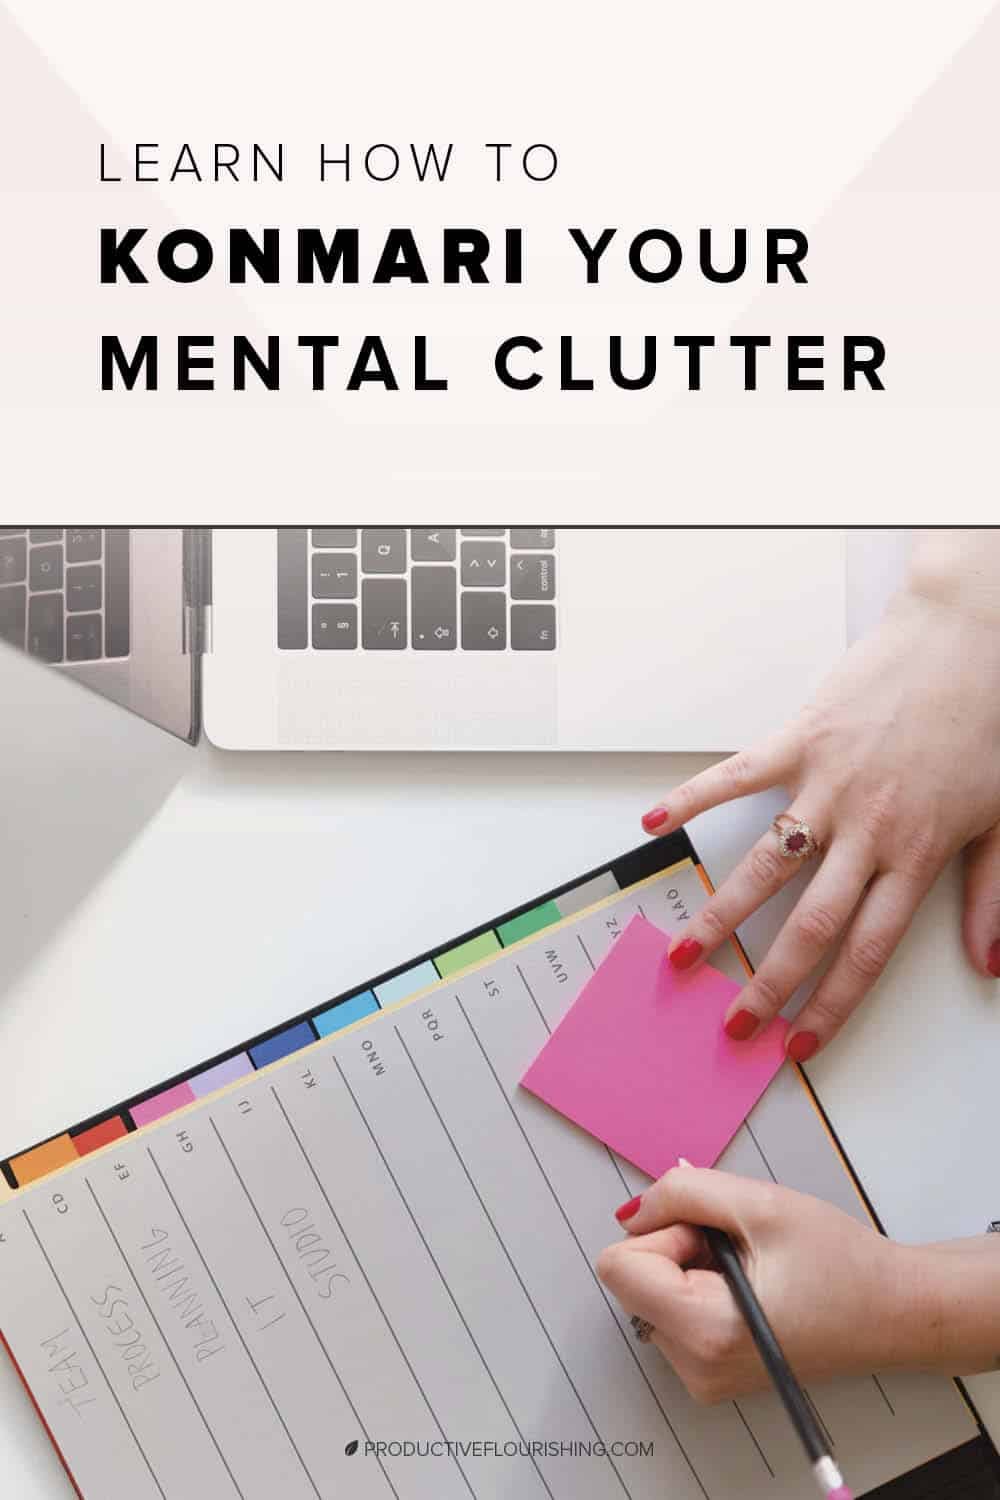 Find three principles to declutter your mental clutter here. Mental clutter obscures our innate entrepreneurship wisdom, creativity, and resilience. The principles of mental decluttering are so simple that you may be tempted to discount them. It can help your business productivity, creativity and goal setting. #declutteringtips #konmariprinciples #productiveflourishing